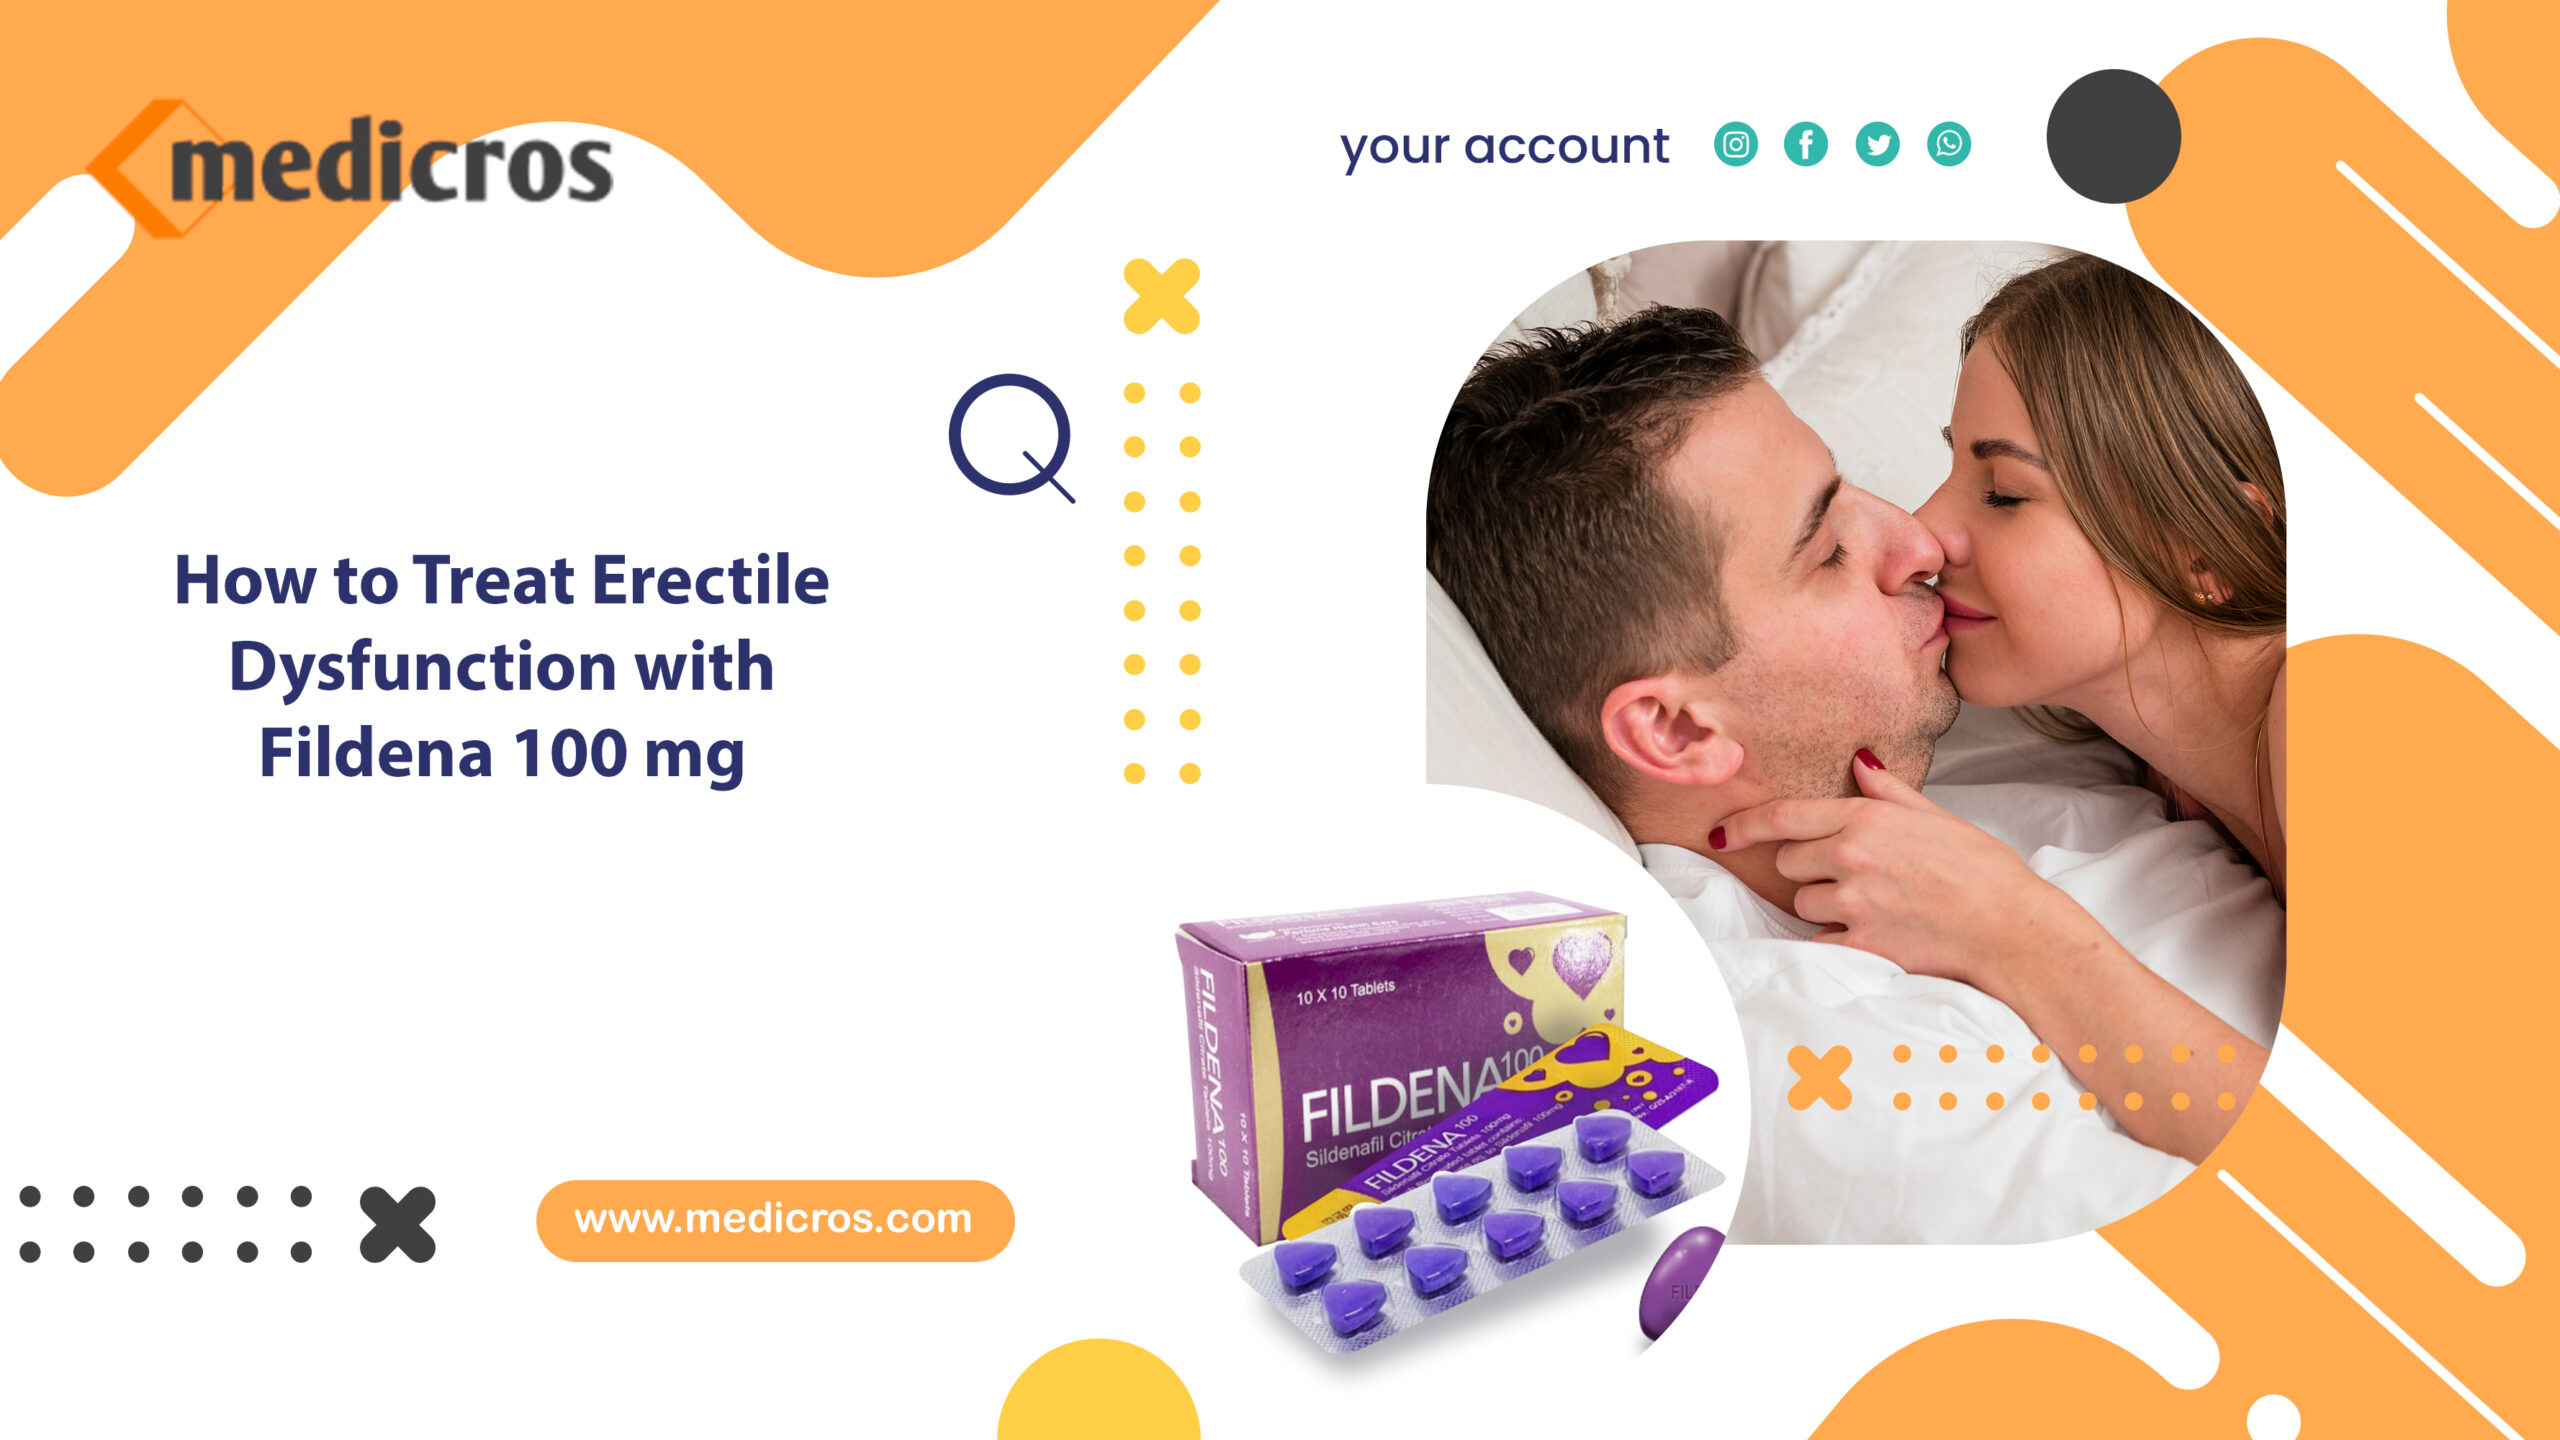 How to Treat Erectile Dysfunction with Fildena 100 mg